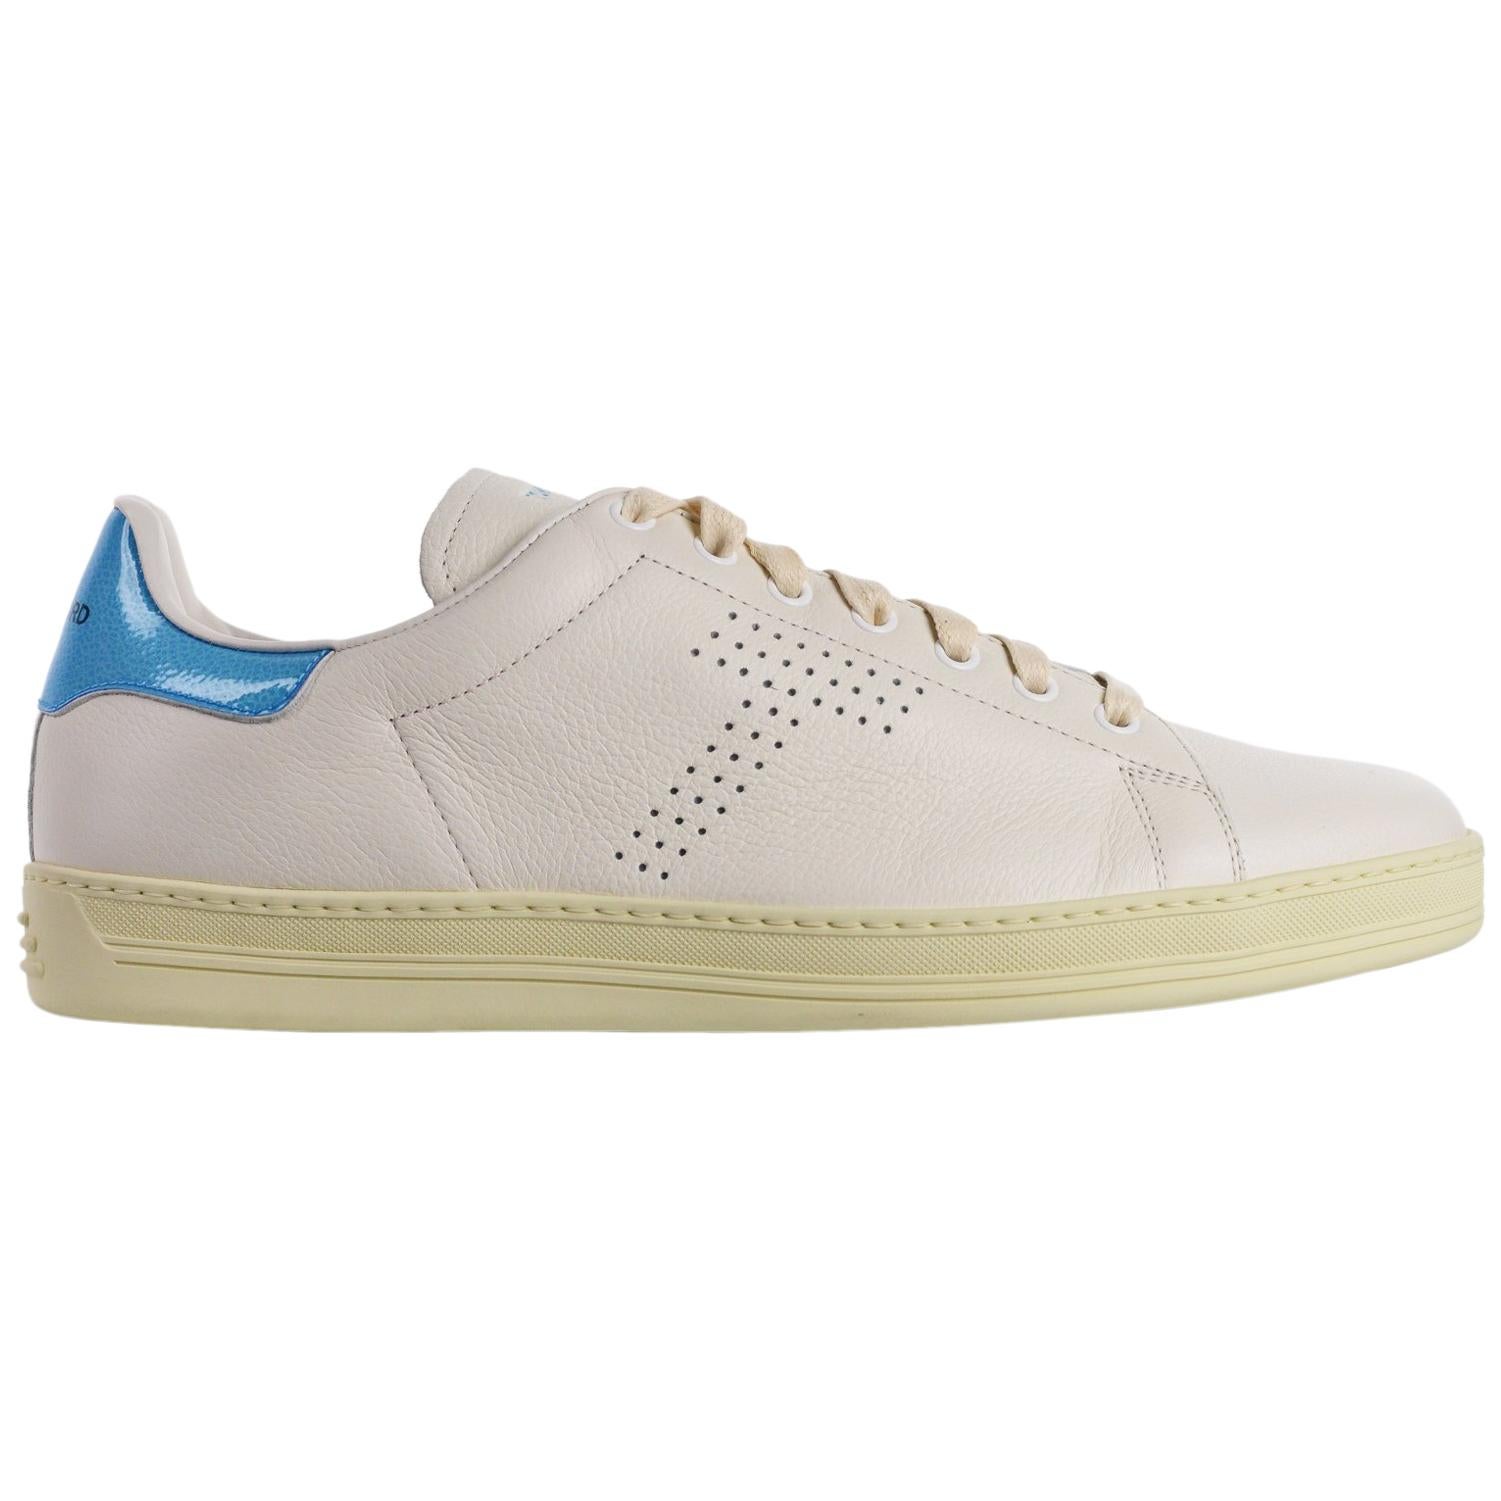 Tom Ford Mens White Blue Leather Warwick Low Top Sneakers im Angebot